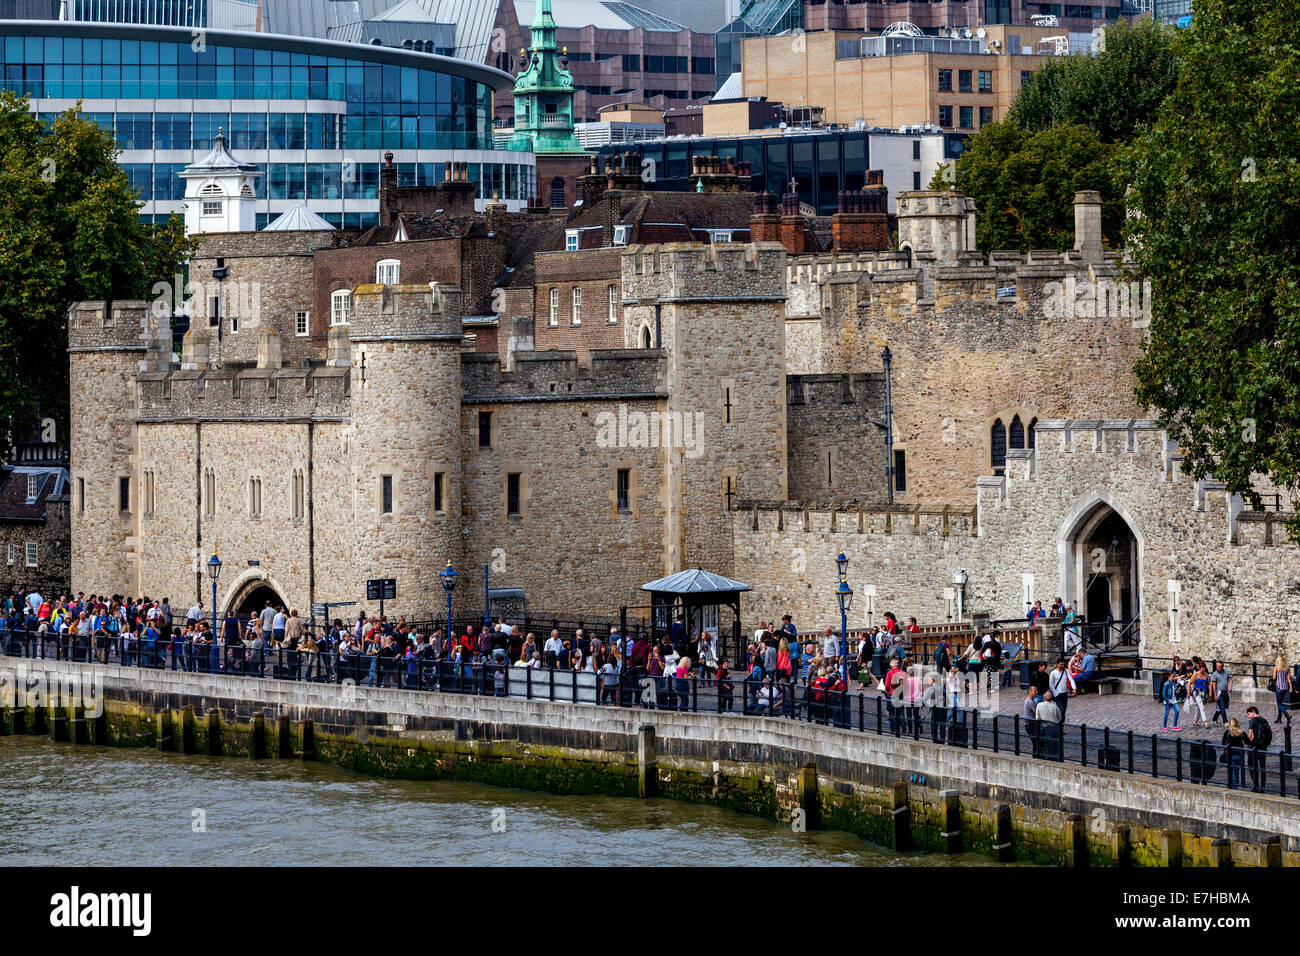 The Tower of London, London, England Stock Photo